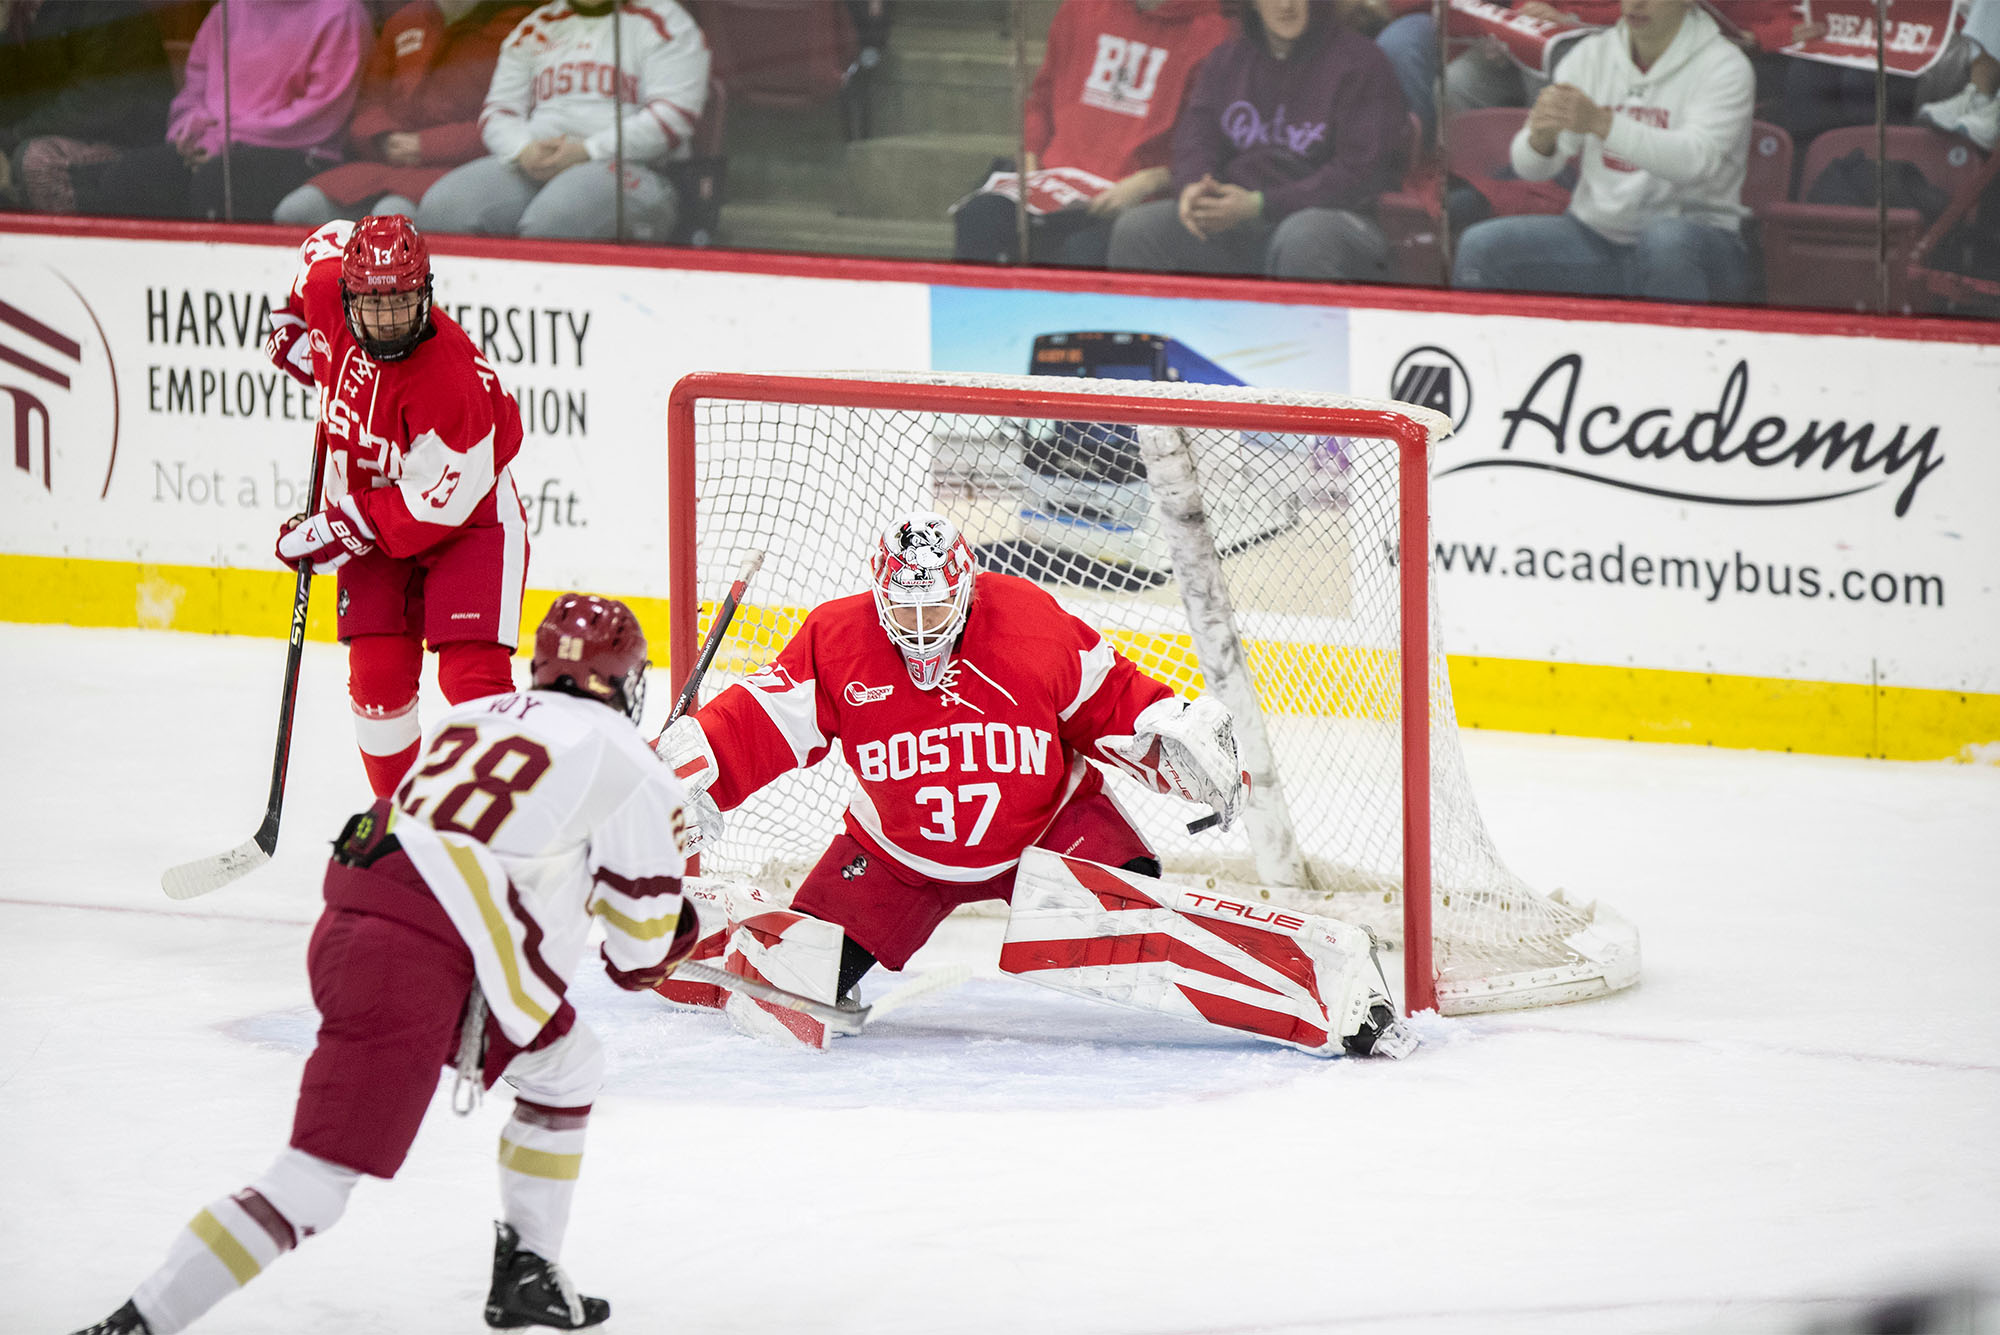 Photo: A hockey goaltender wearing red and white stops a shot from a player wearing brown and gold